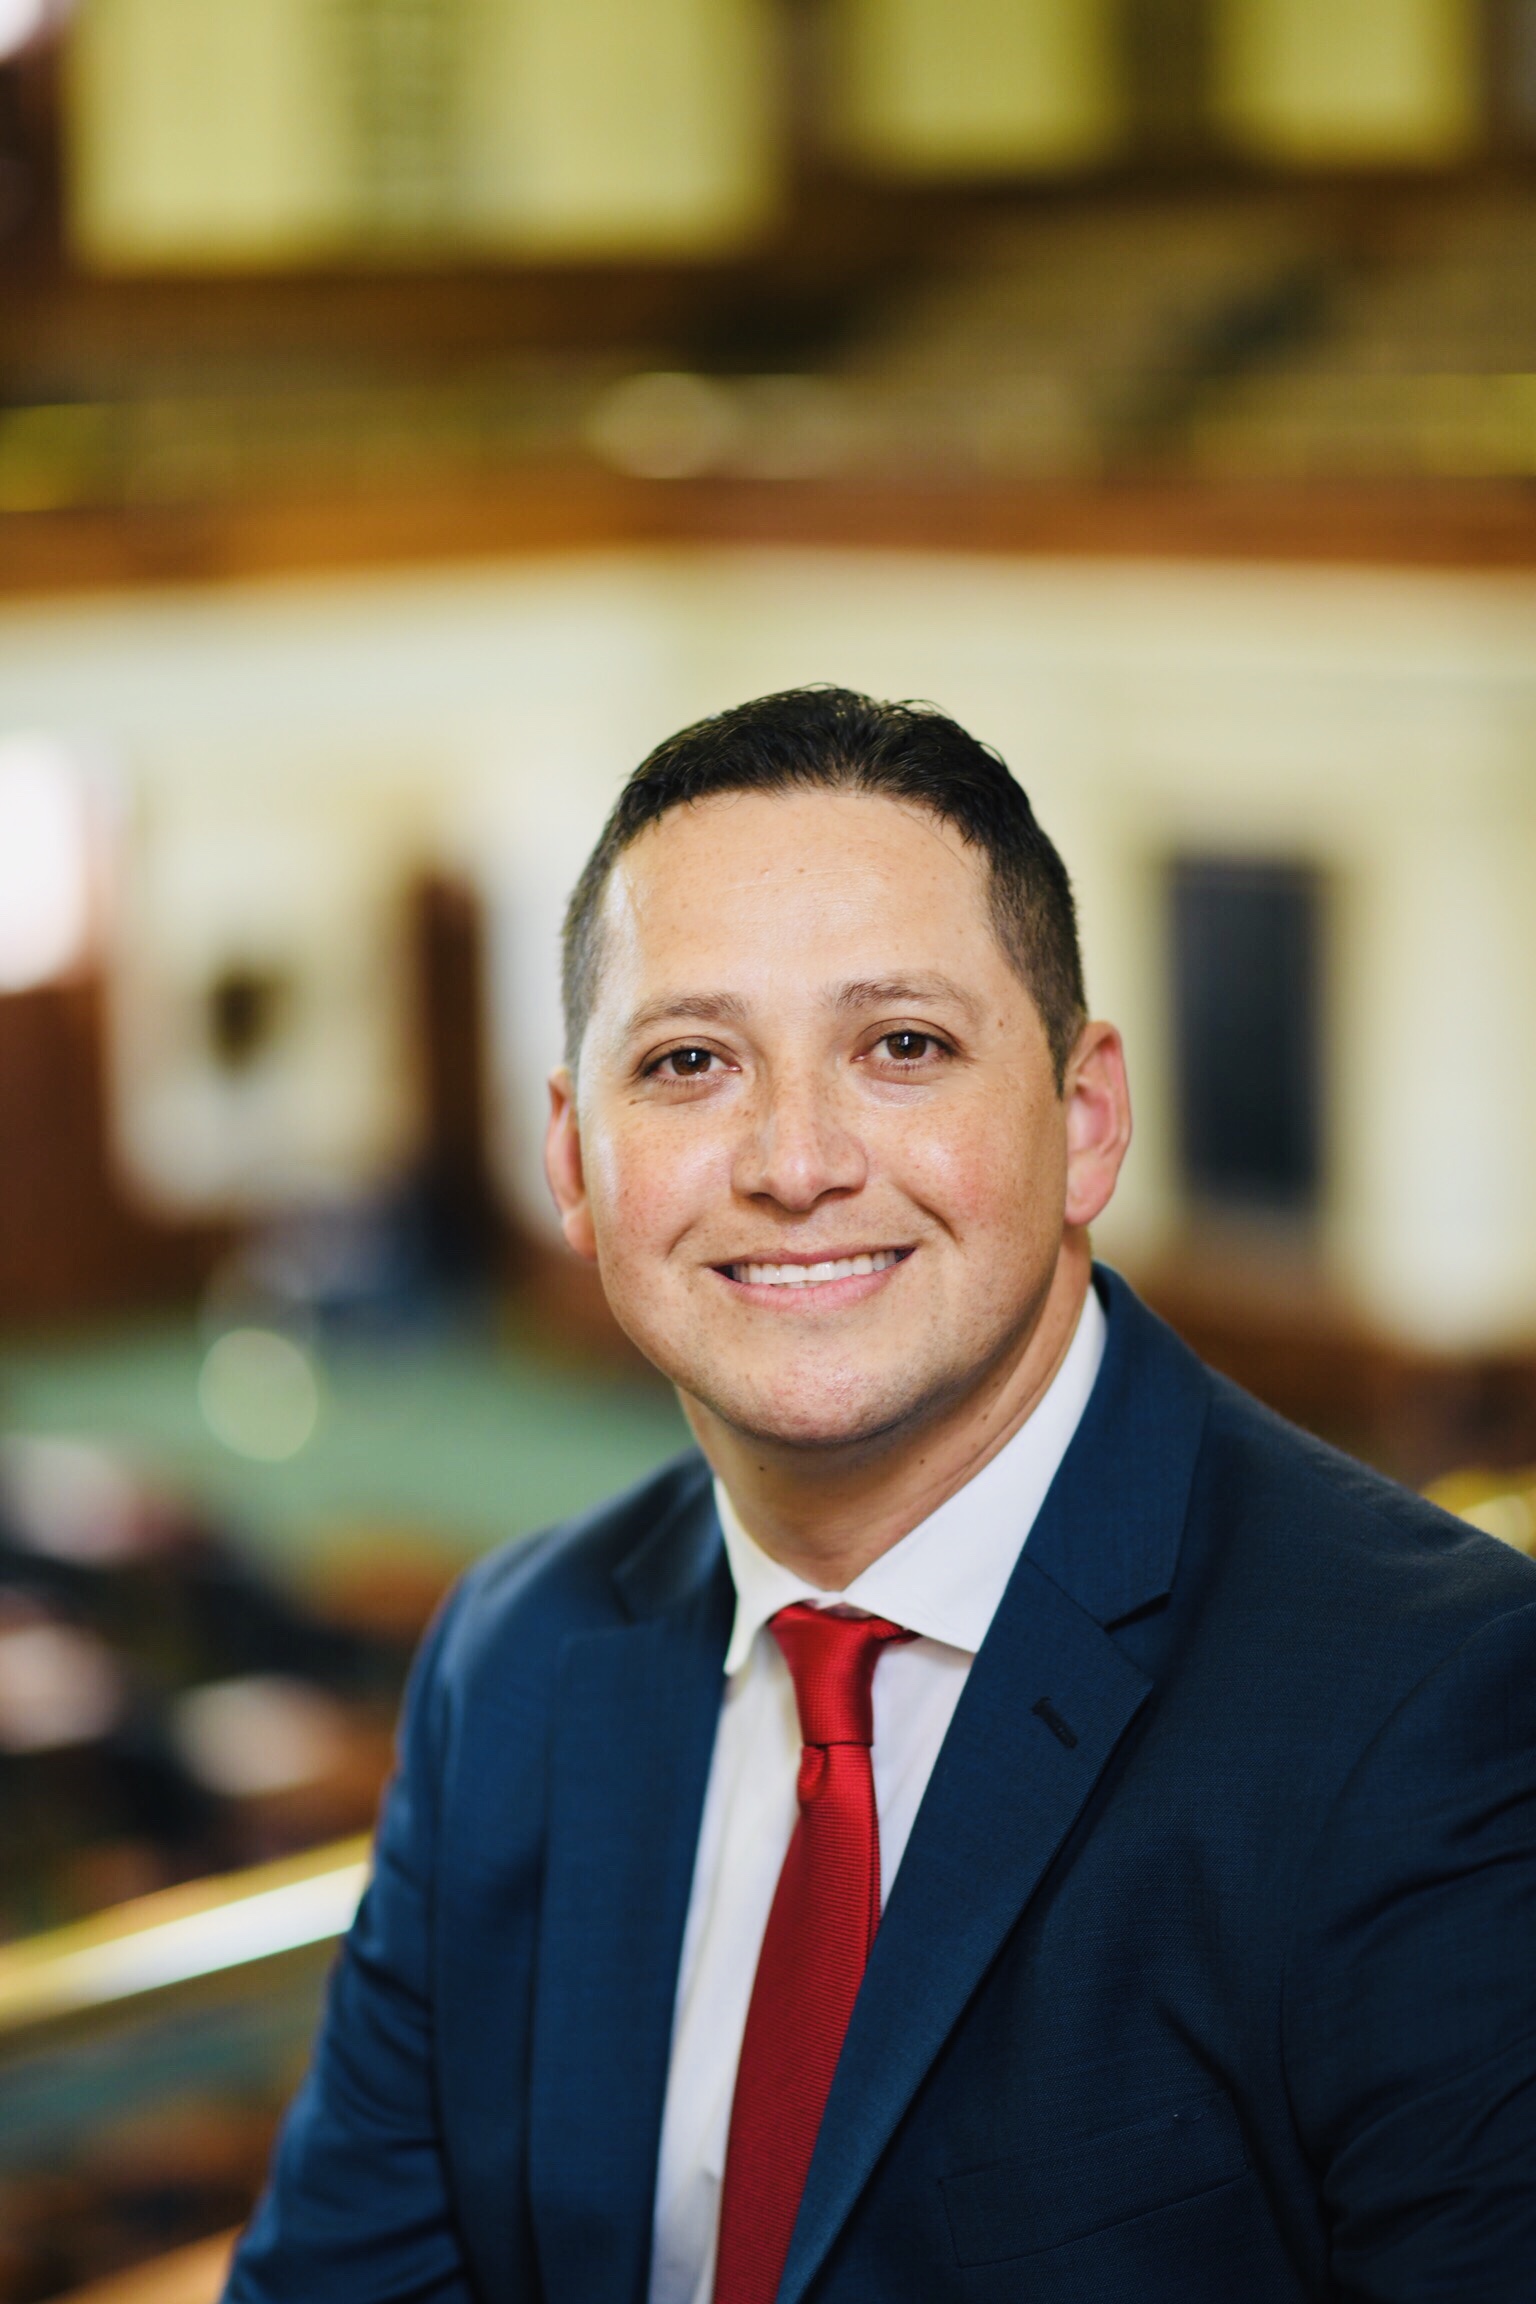 Beyond the Podium: Tony Gonzales, Candidate for U.S. Representative, District 23